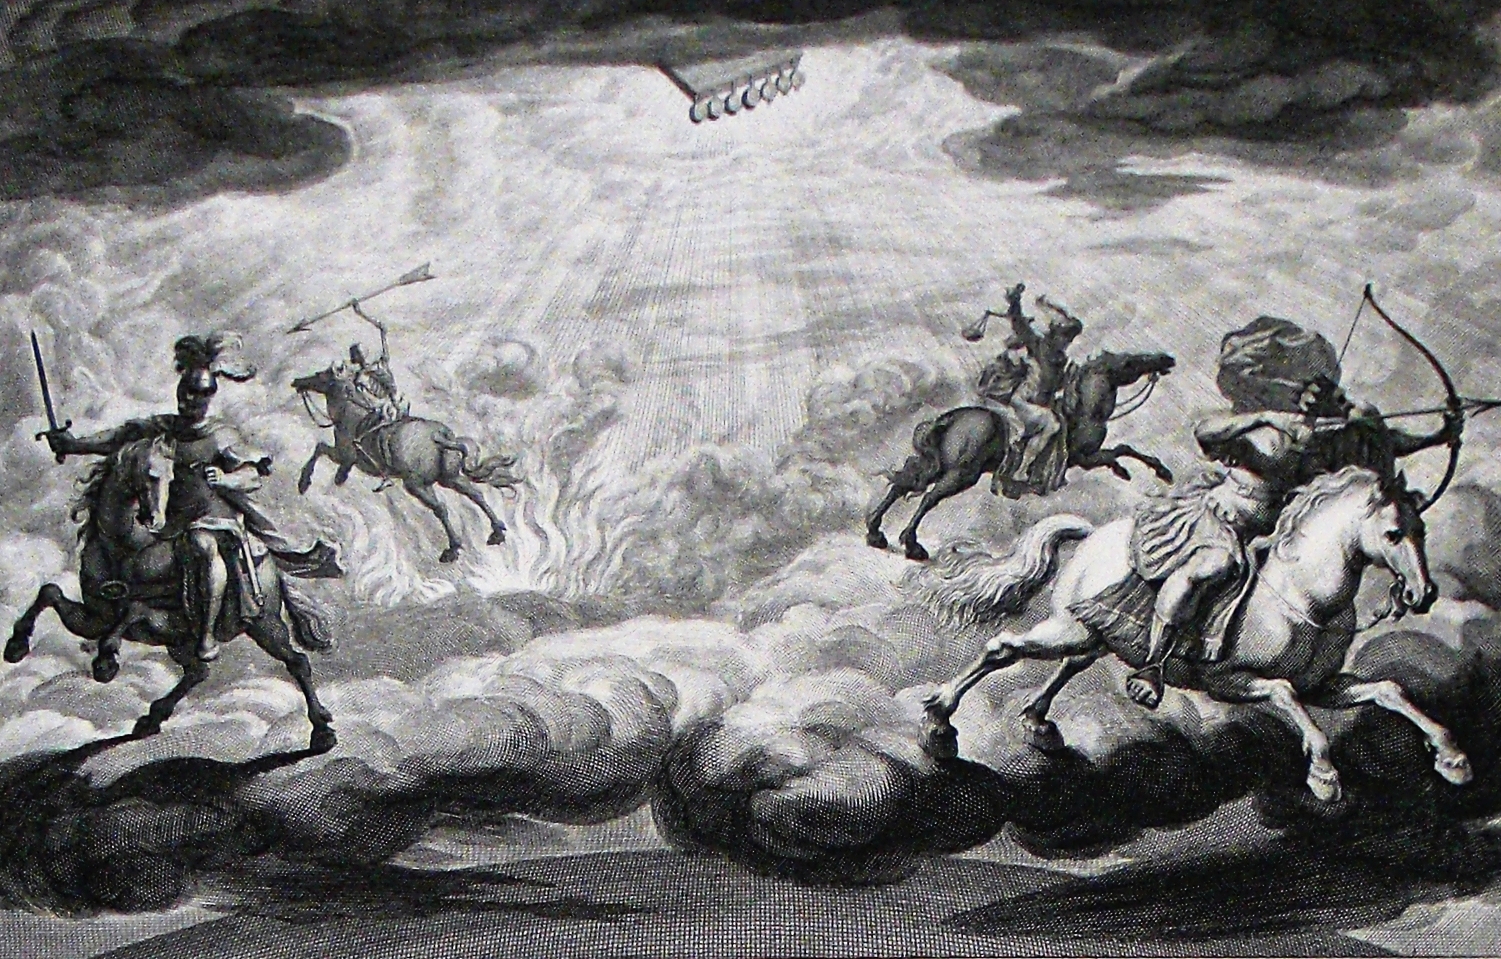 Black and white image of people on horses battling.